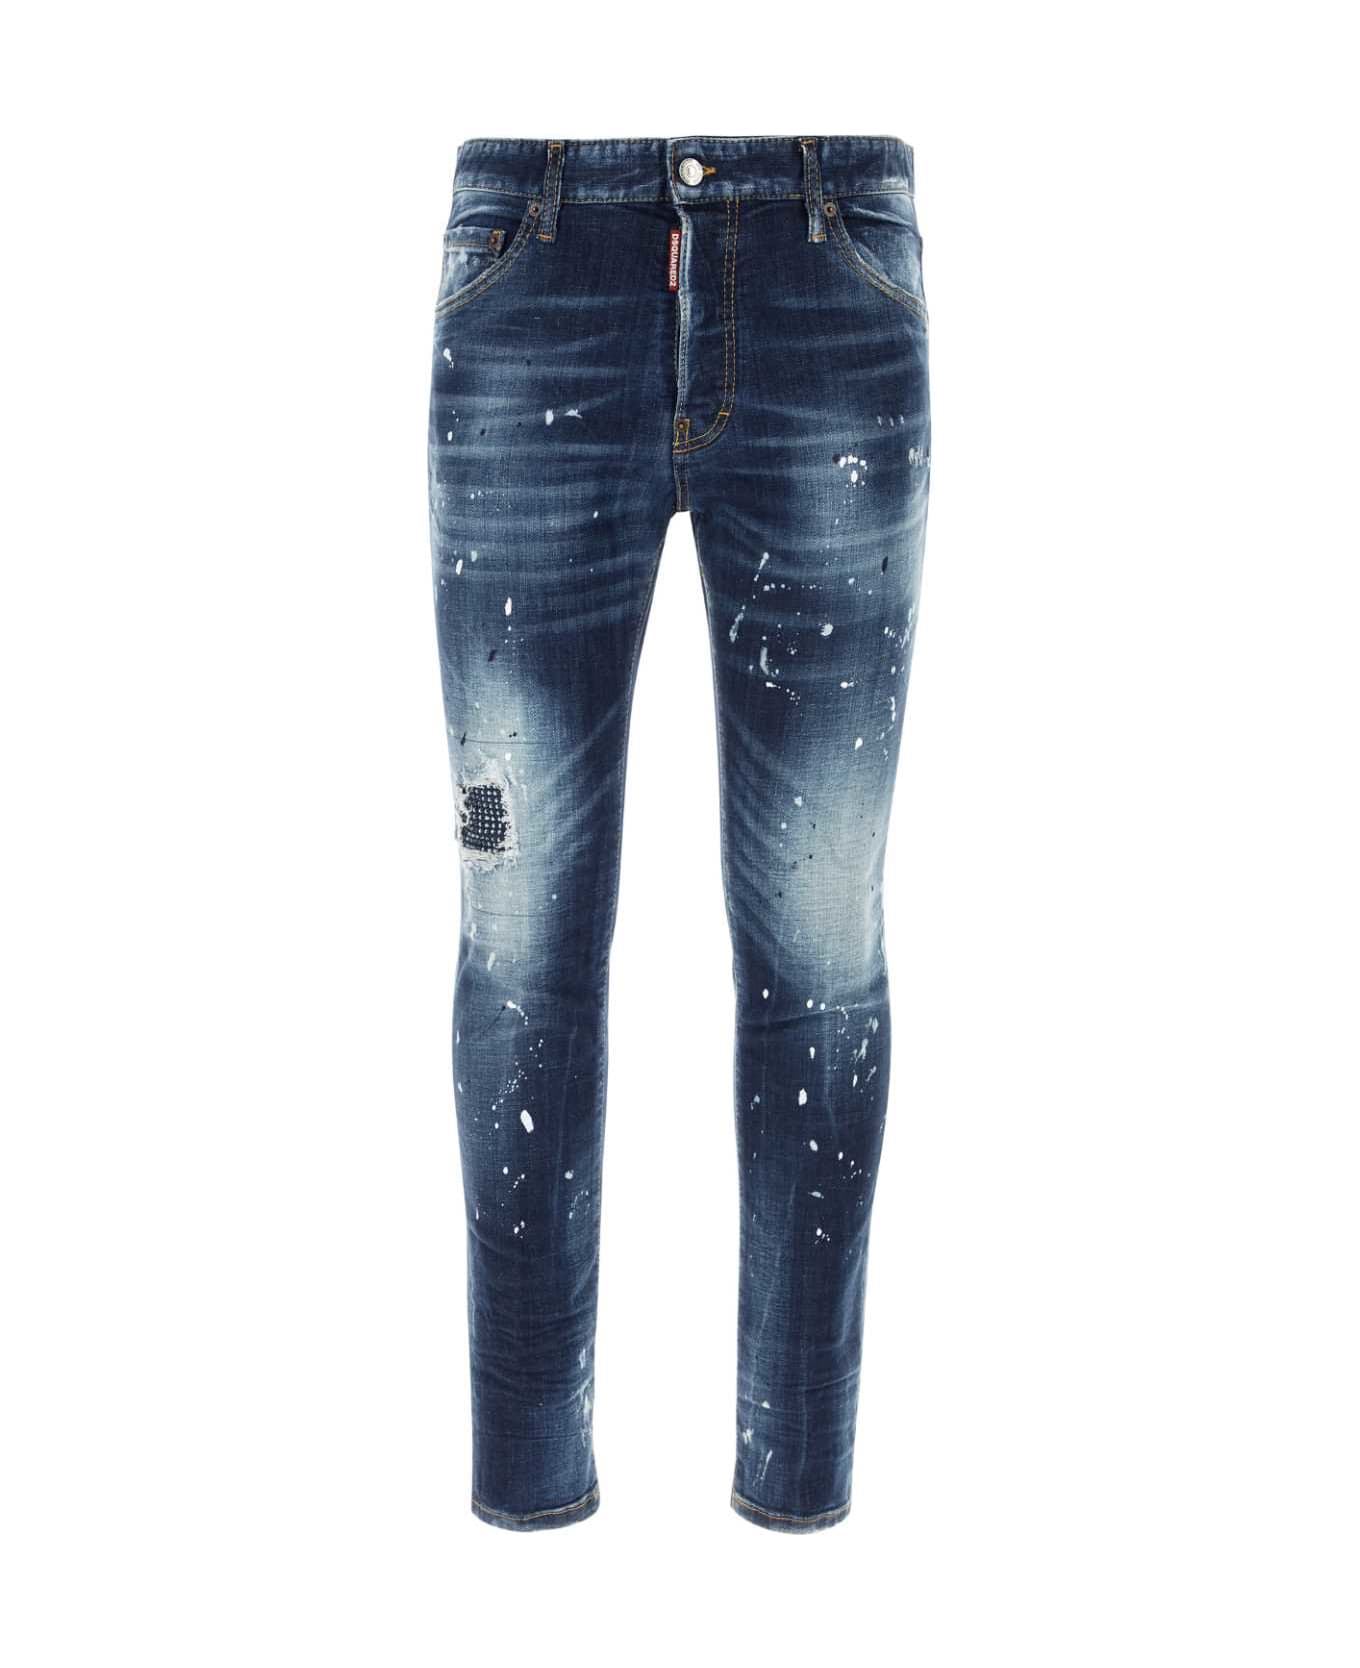 Dsquared2 Stretch Denim Cool Guy Jeans - NAVYBLUE